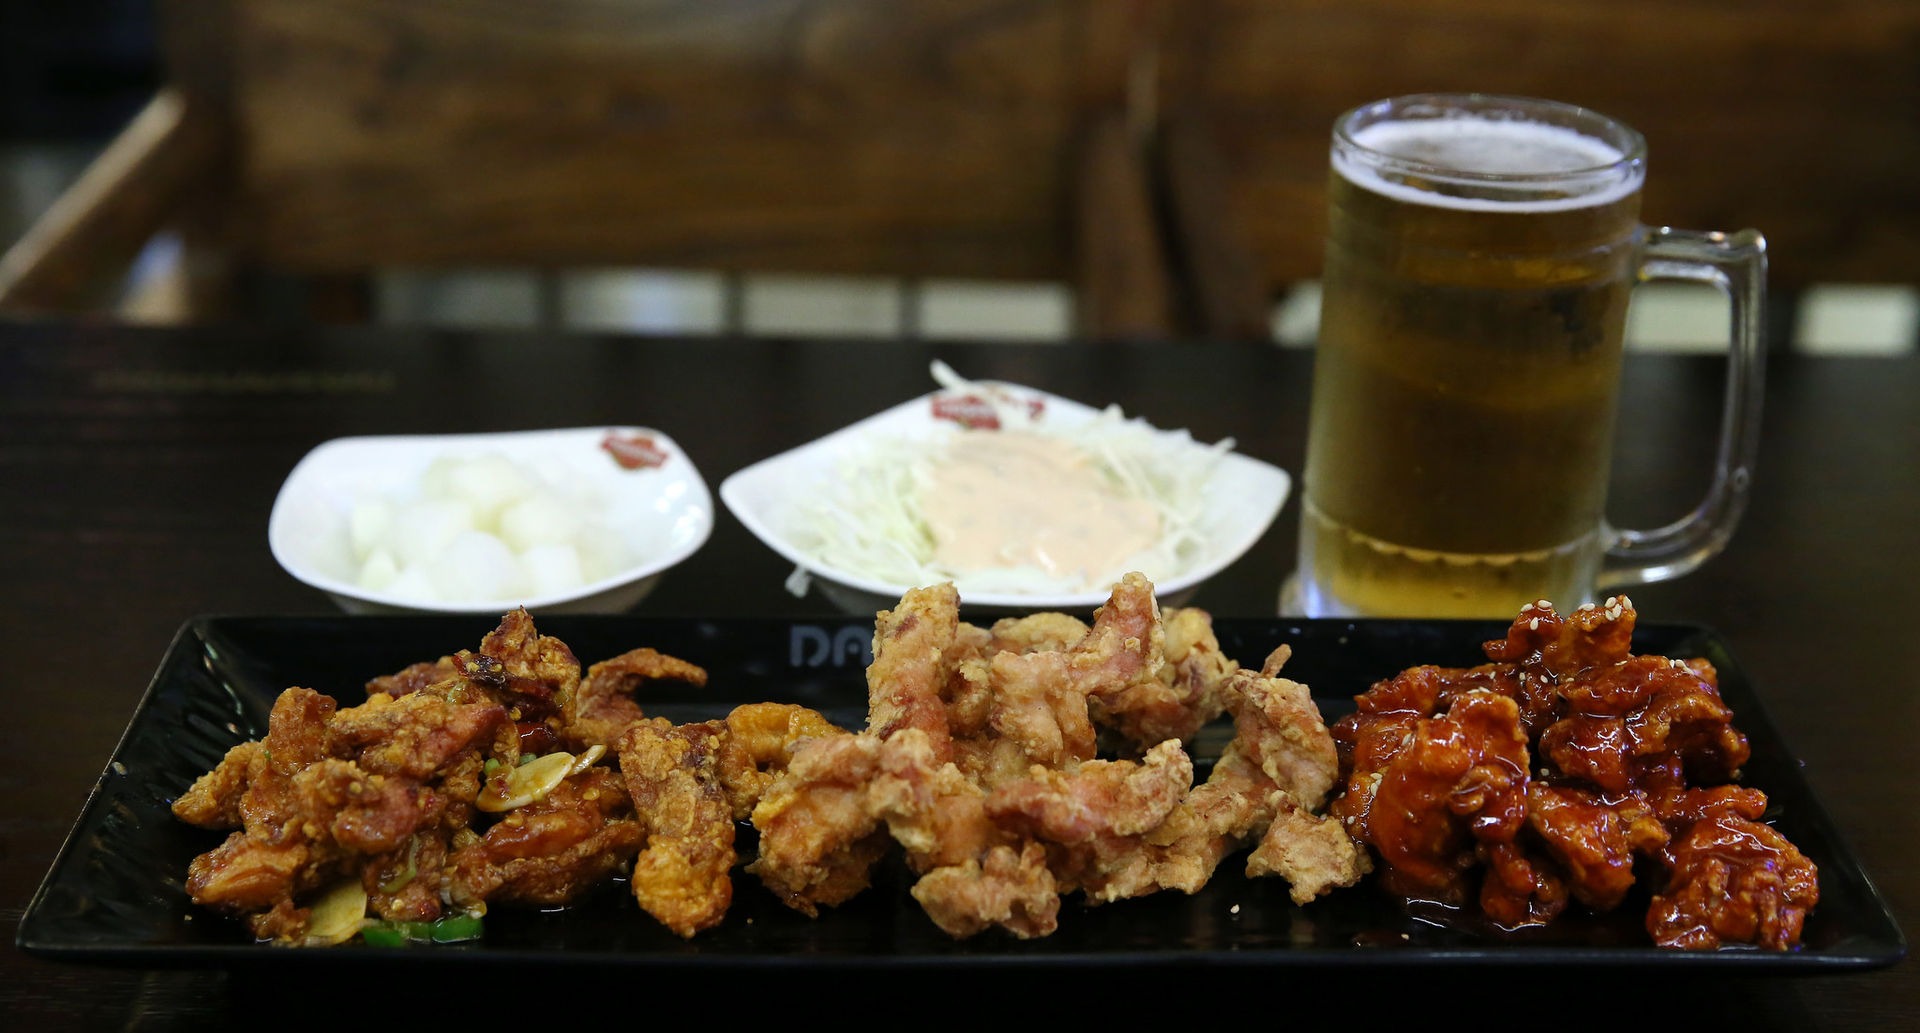 Image of Korean fried chicken in three platters on a table.